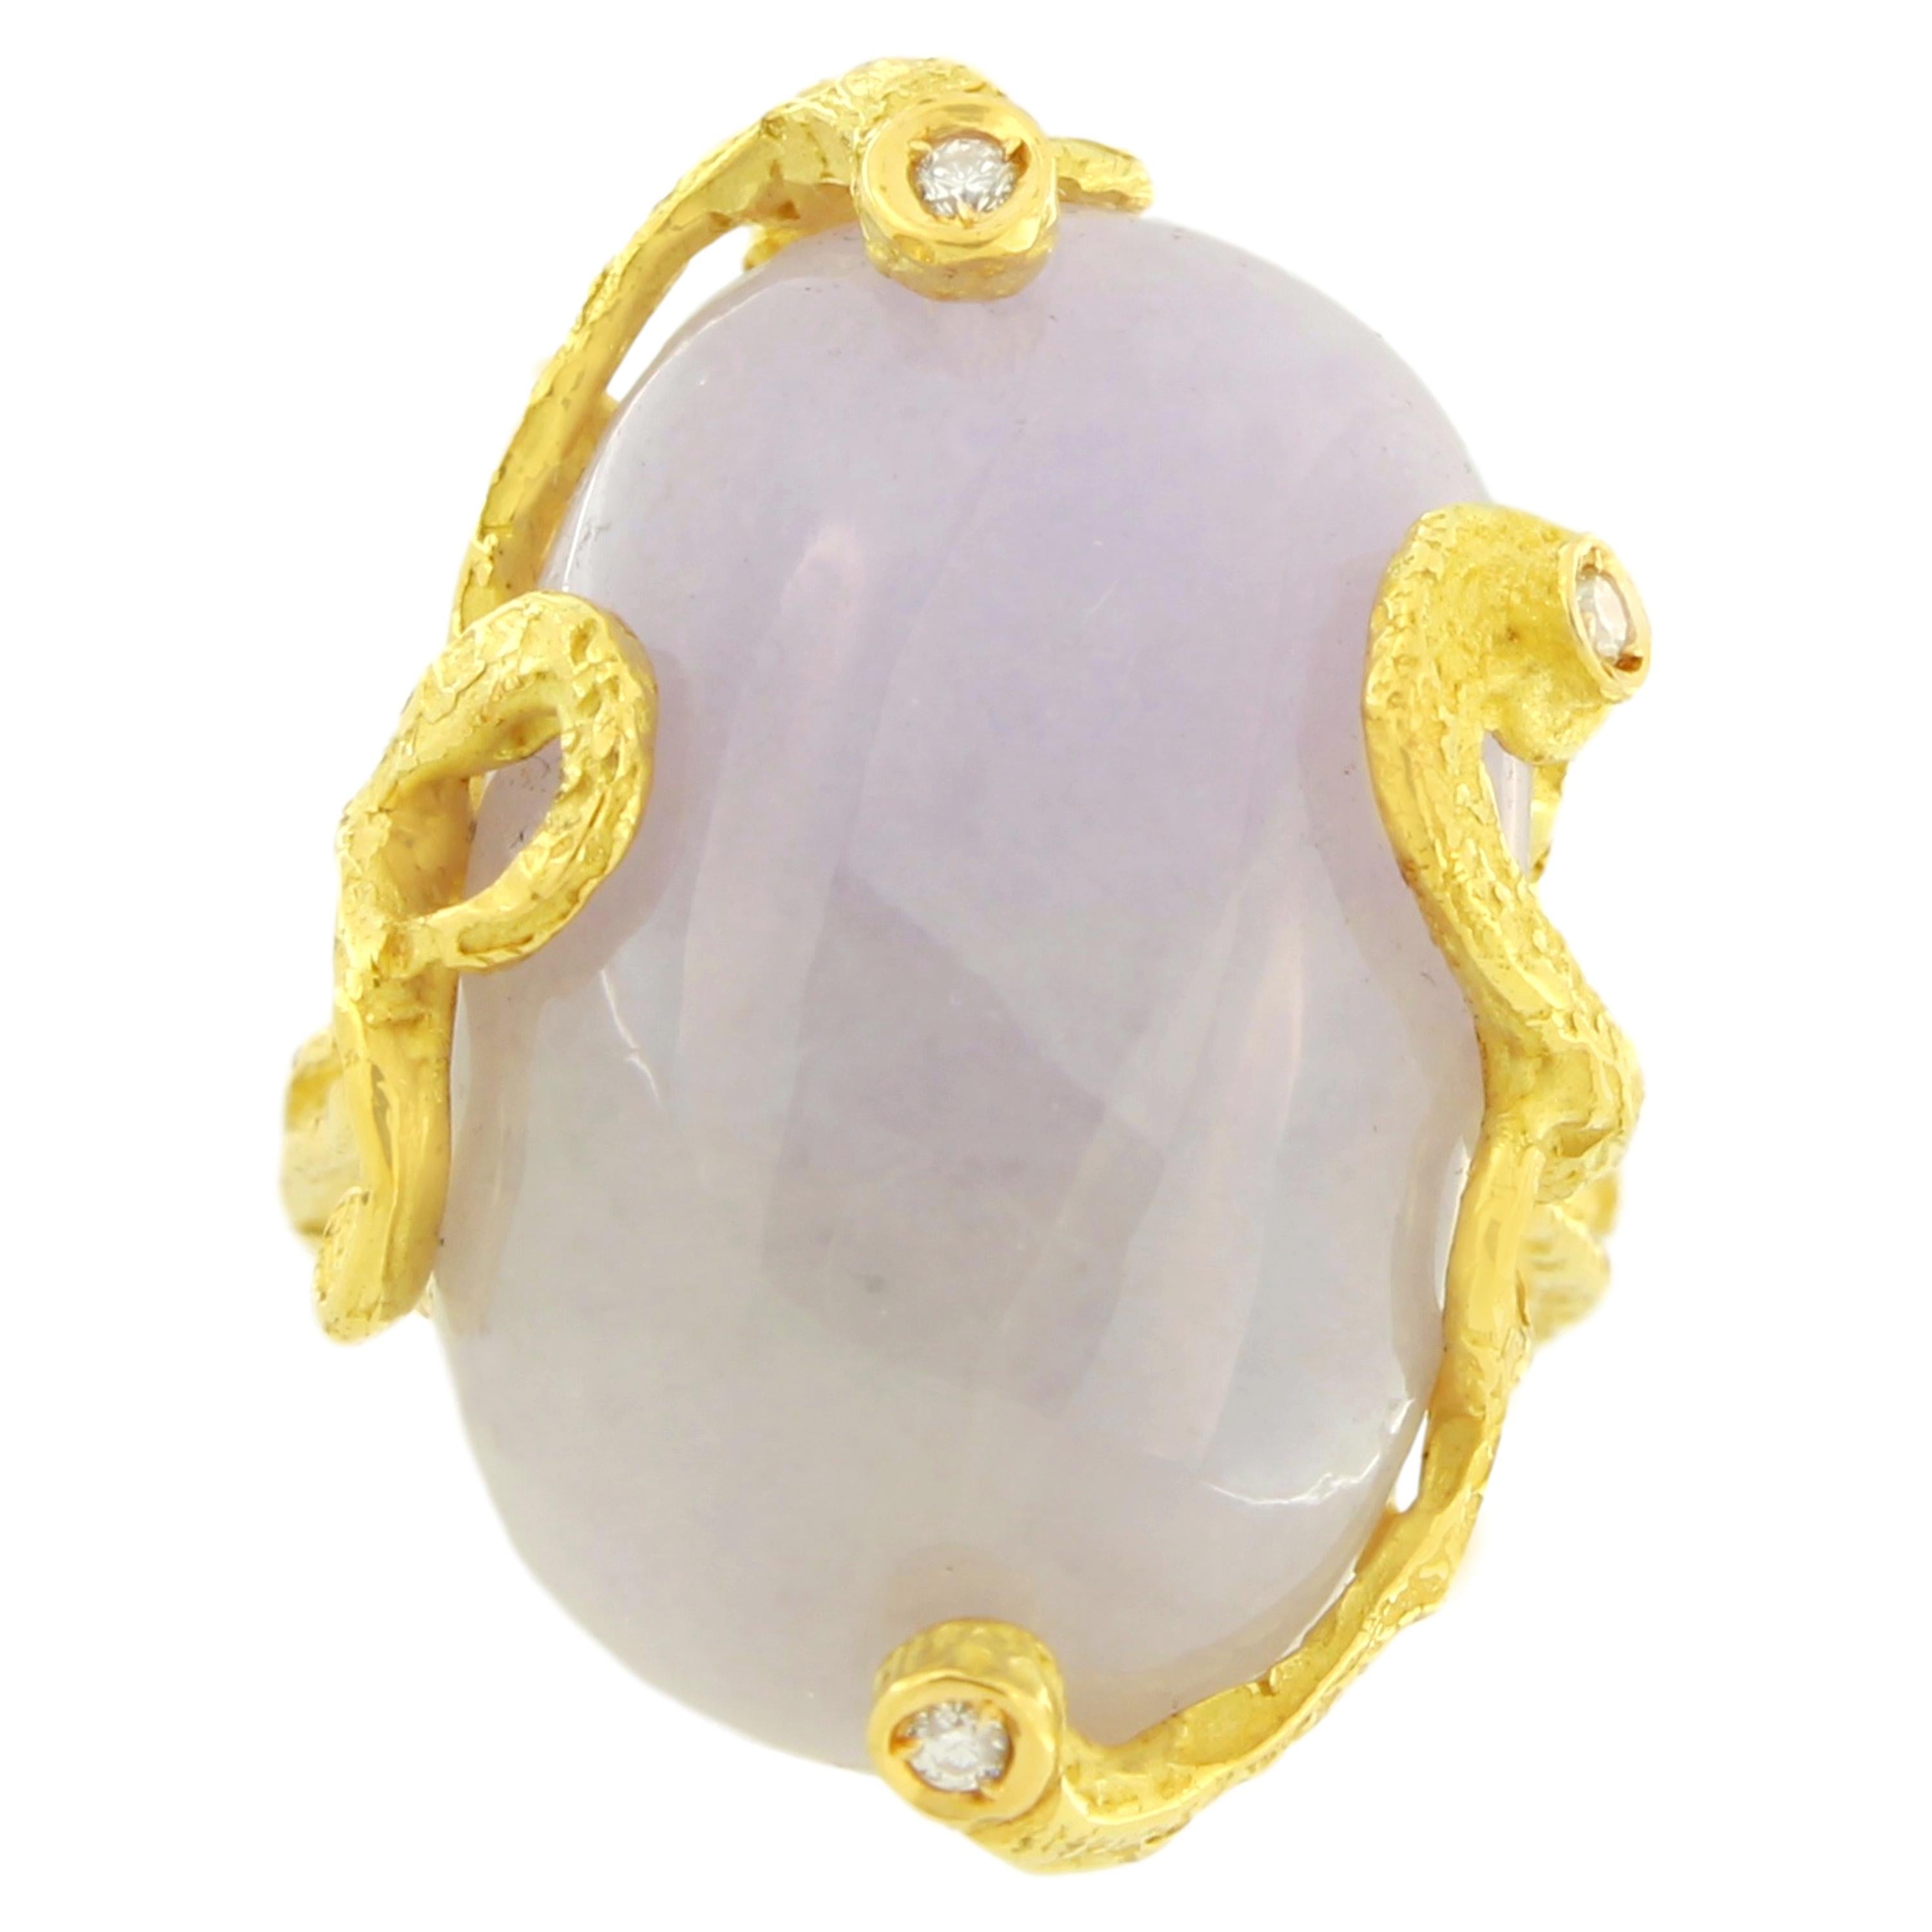 Exquisite Lavender Jade Gemstone Satin Yellow Gold Cocktail Ring embellished with White Diamonds, from Sacchi’s “Burlesque” Collection, hand-crafted with lost-wax casting technique.

Lost-wax casting, one of the oldest techniques for creating